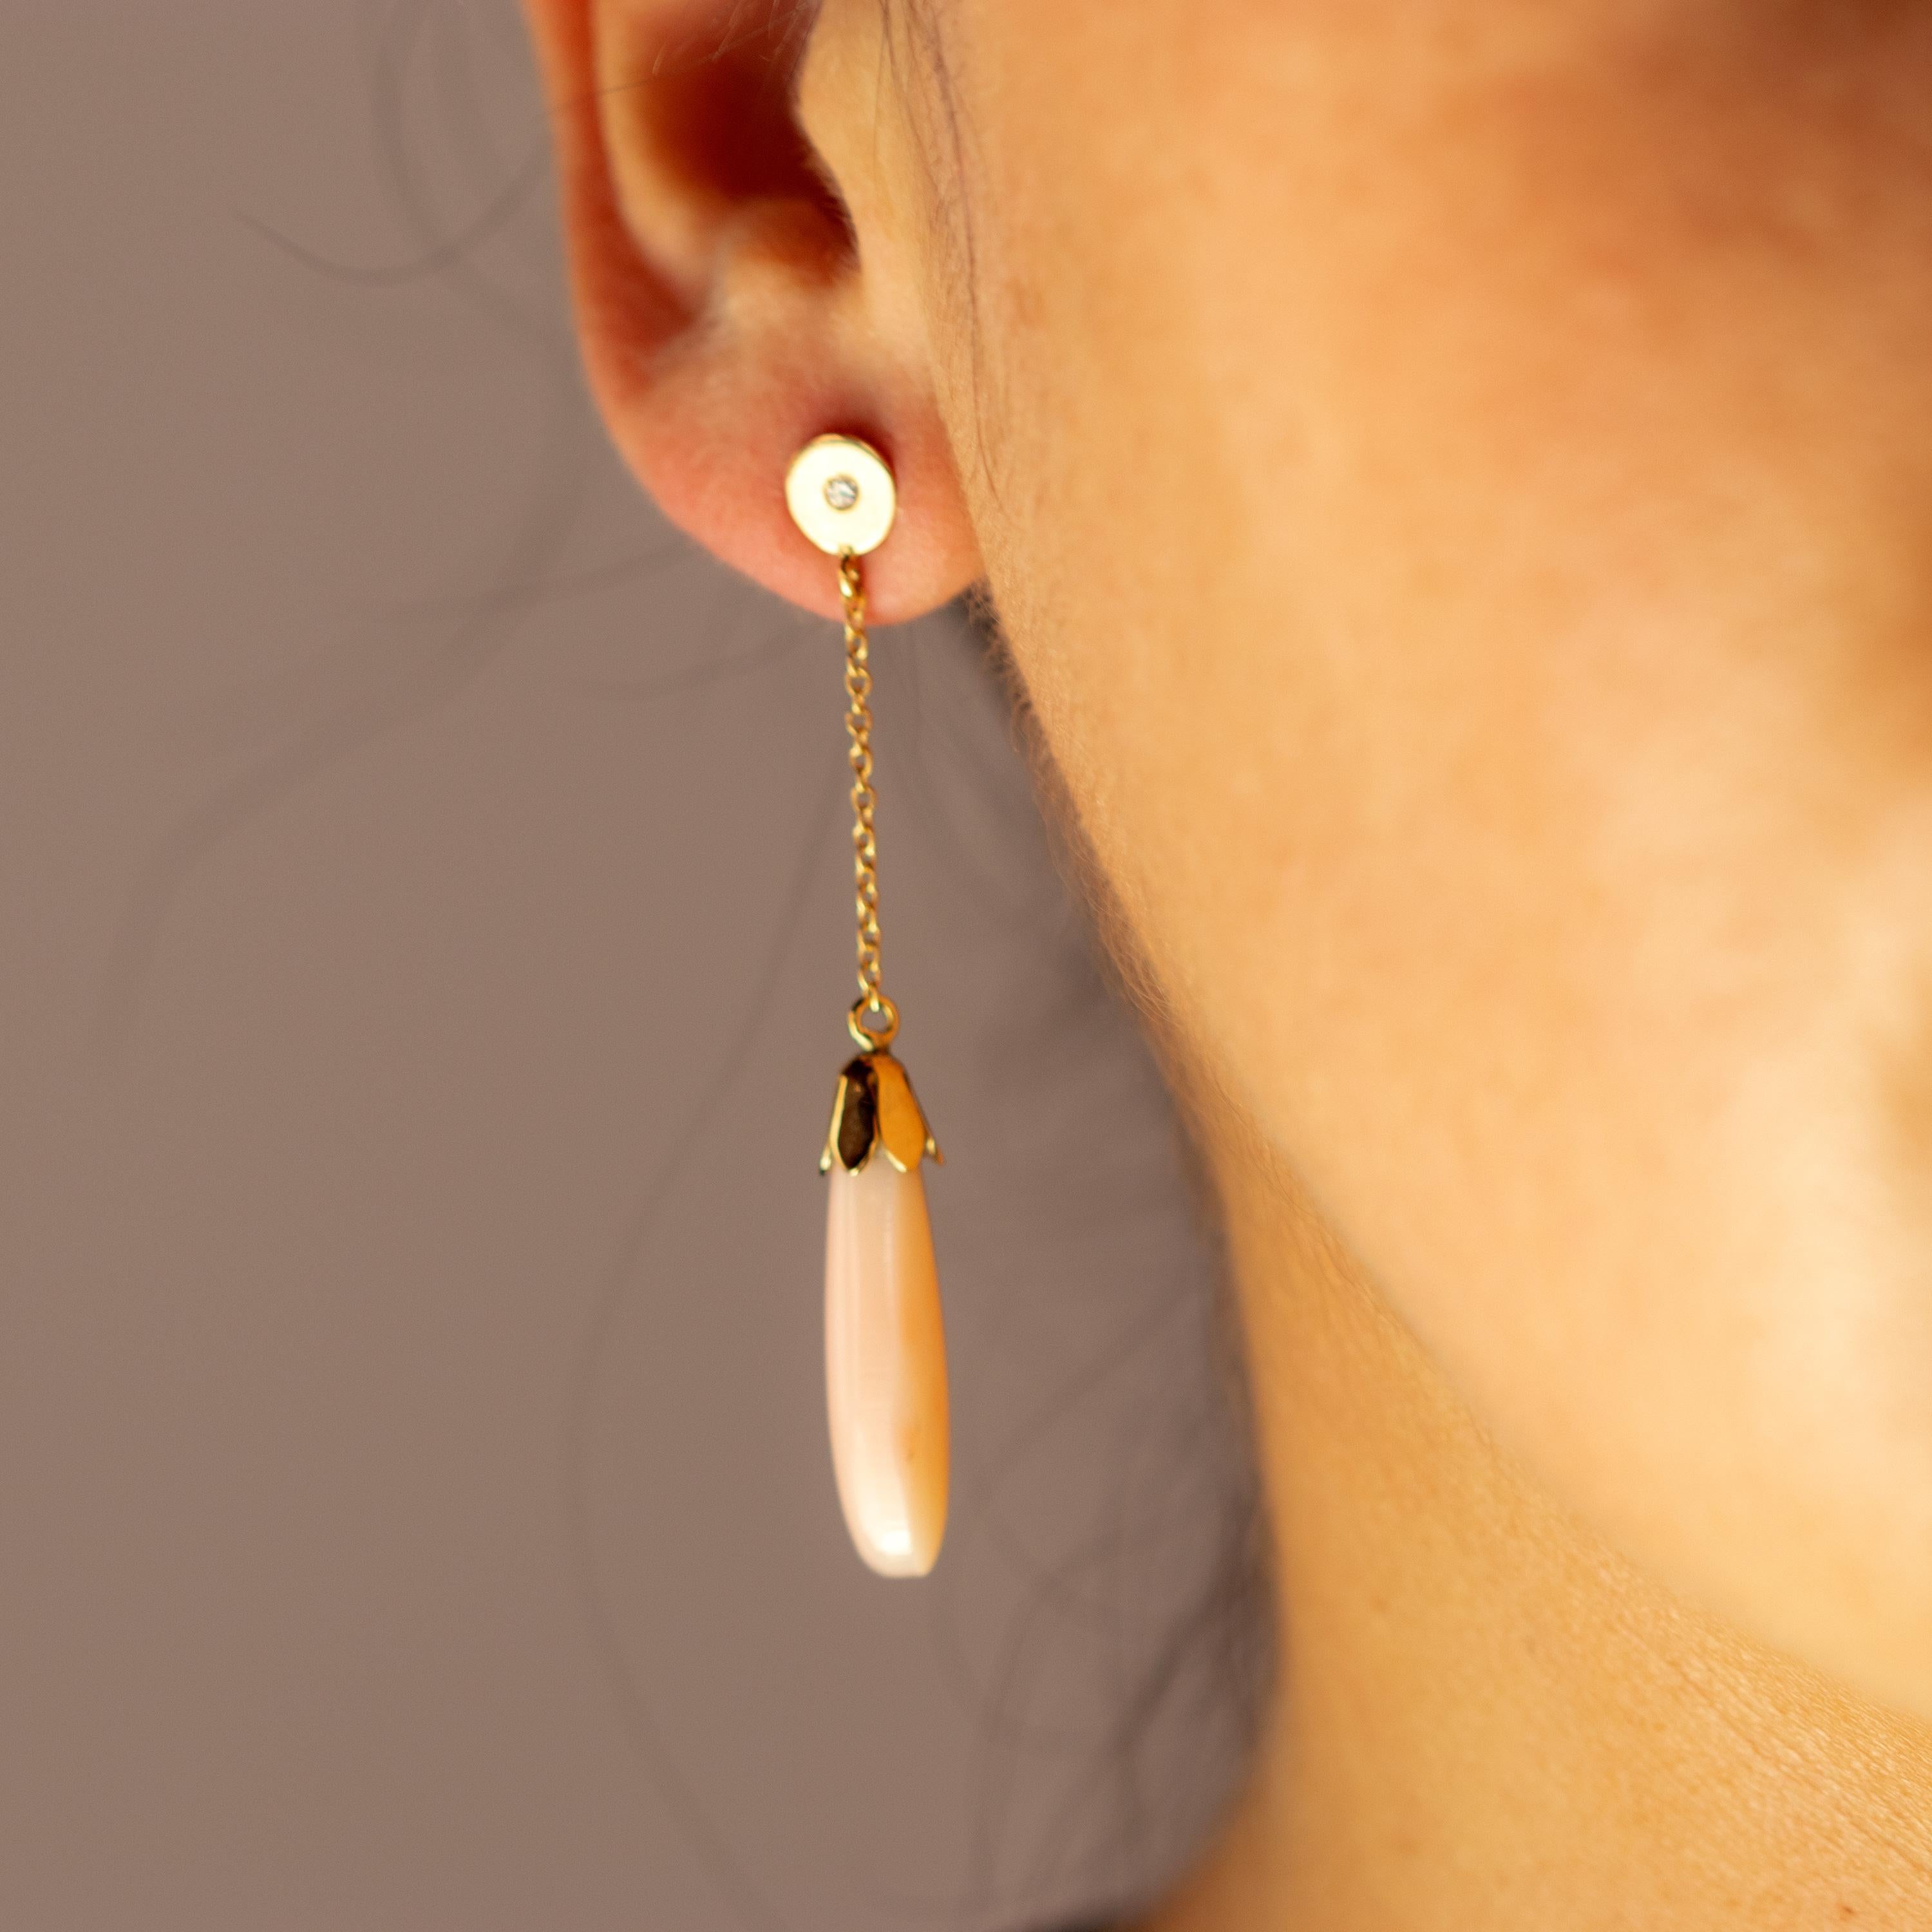 Exotic 0.5 carat diamond and 11 carat coral dangle earrings. The 18 karat yellow gold enhances the piece with a round circle that is connected to a delicate chain holding a beautifully carved and light salmon natural coral long shaped gem.

These